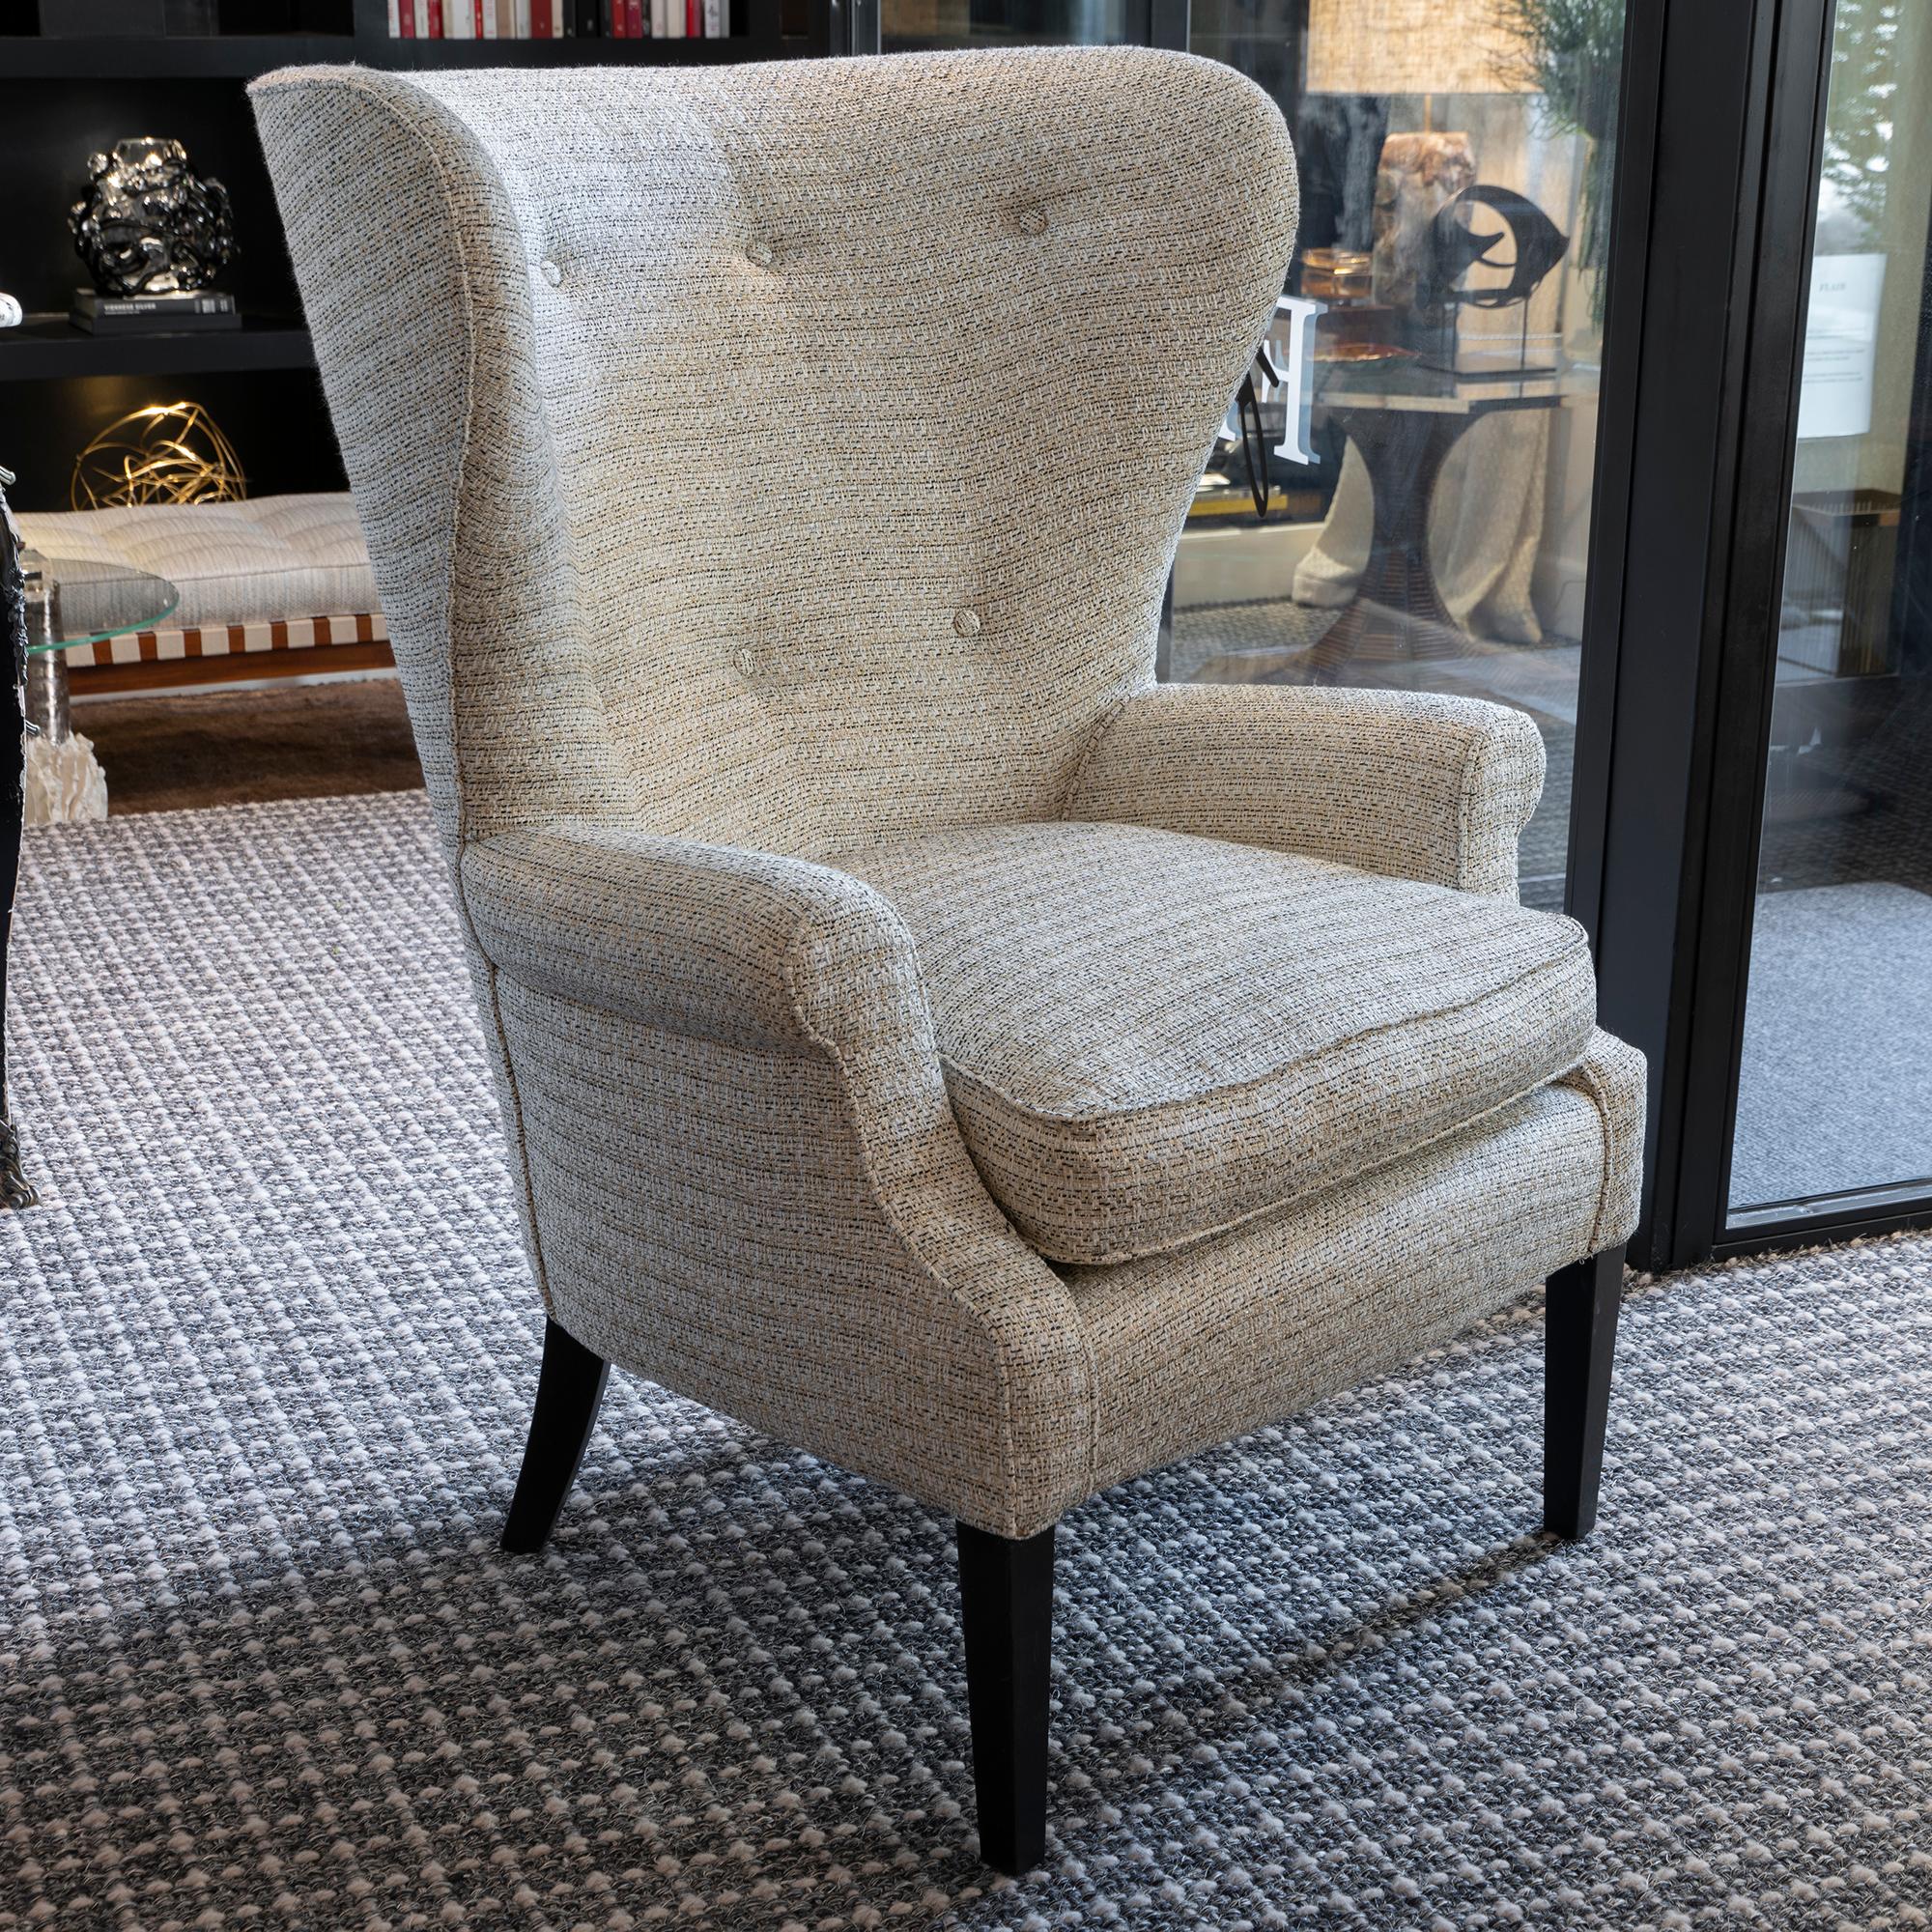 Original 1980s bergère from De Padova newly reupholstered in white/beige/black woven fabric, black wood details.
 